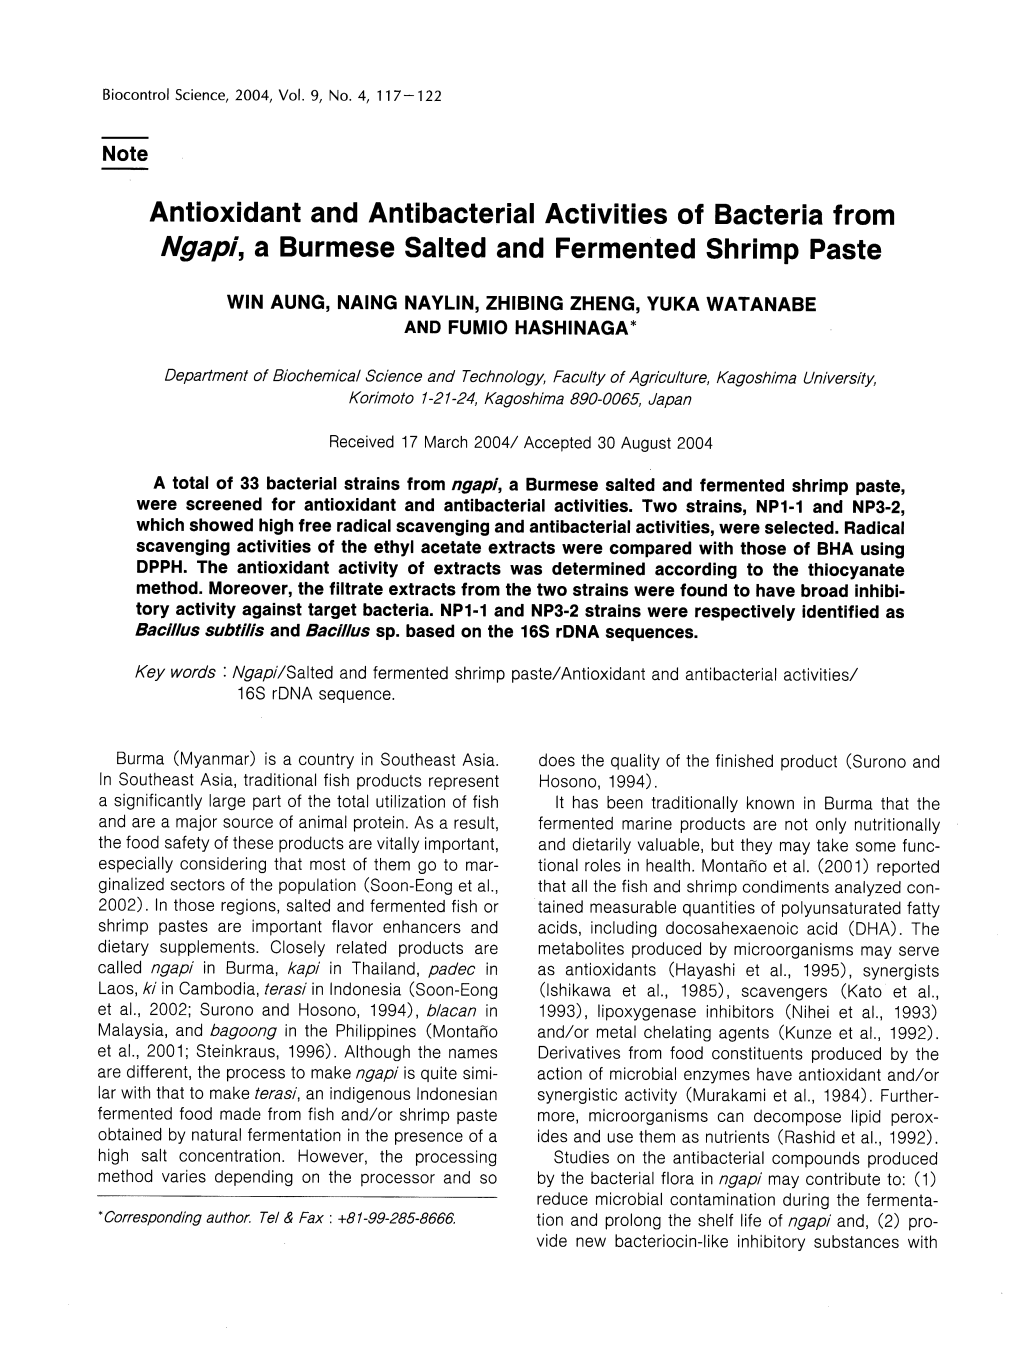 Antioxidant and Antibacterial Activities of Bacteria from Ngapi, a Burmese Salted and Fermented Shrimp Paste